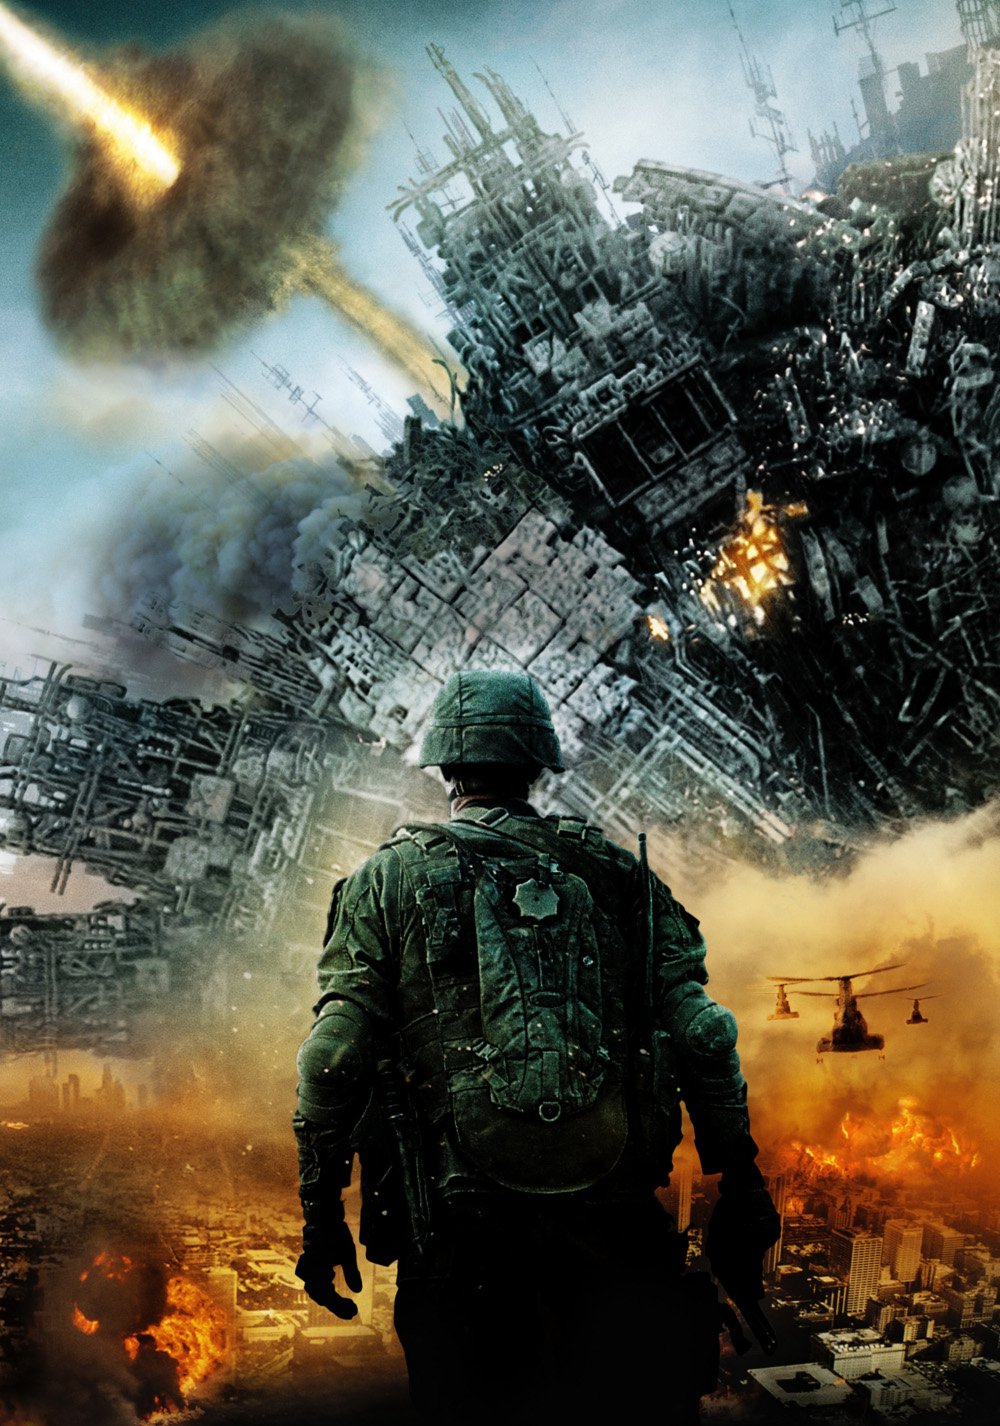 battle of los angeles movie free download